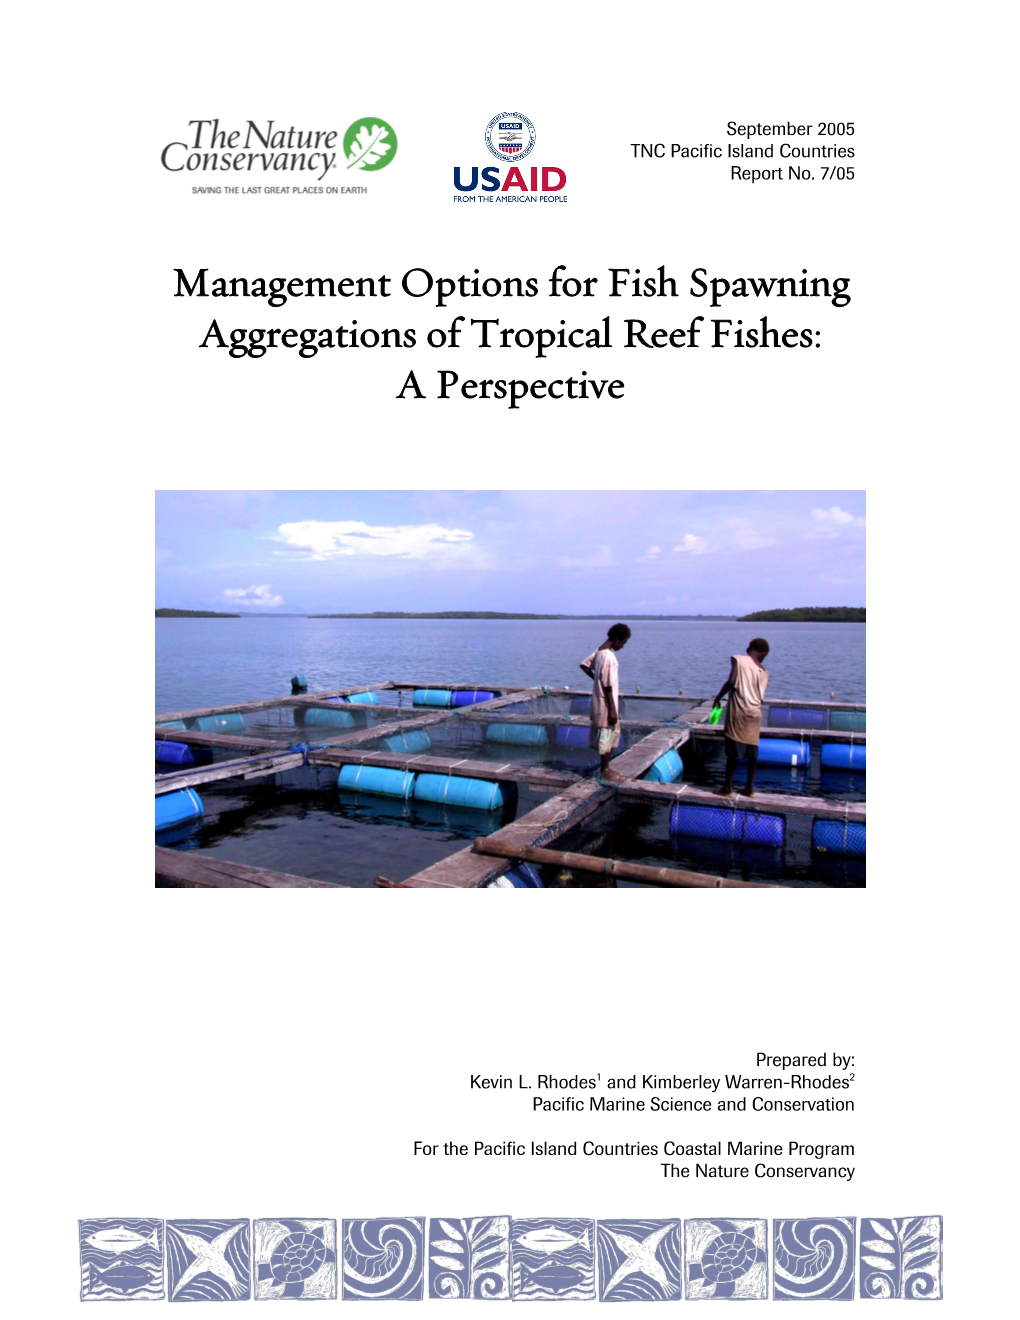 Management Options for Fish Spawning Aggregations of Tropical Reef Fishes: a Perspective